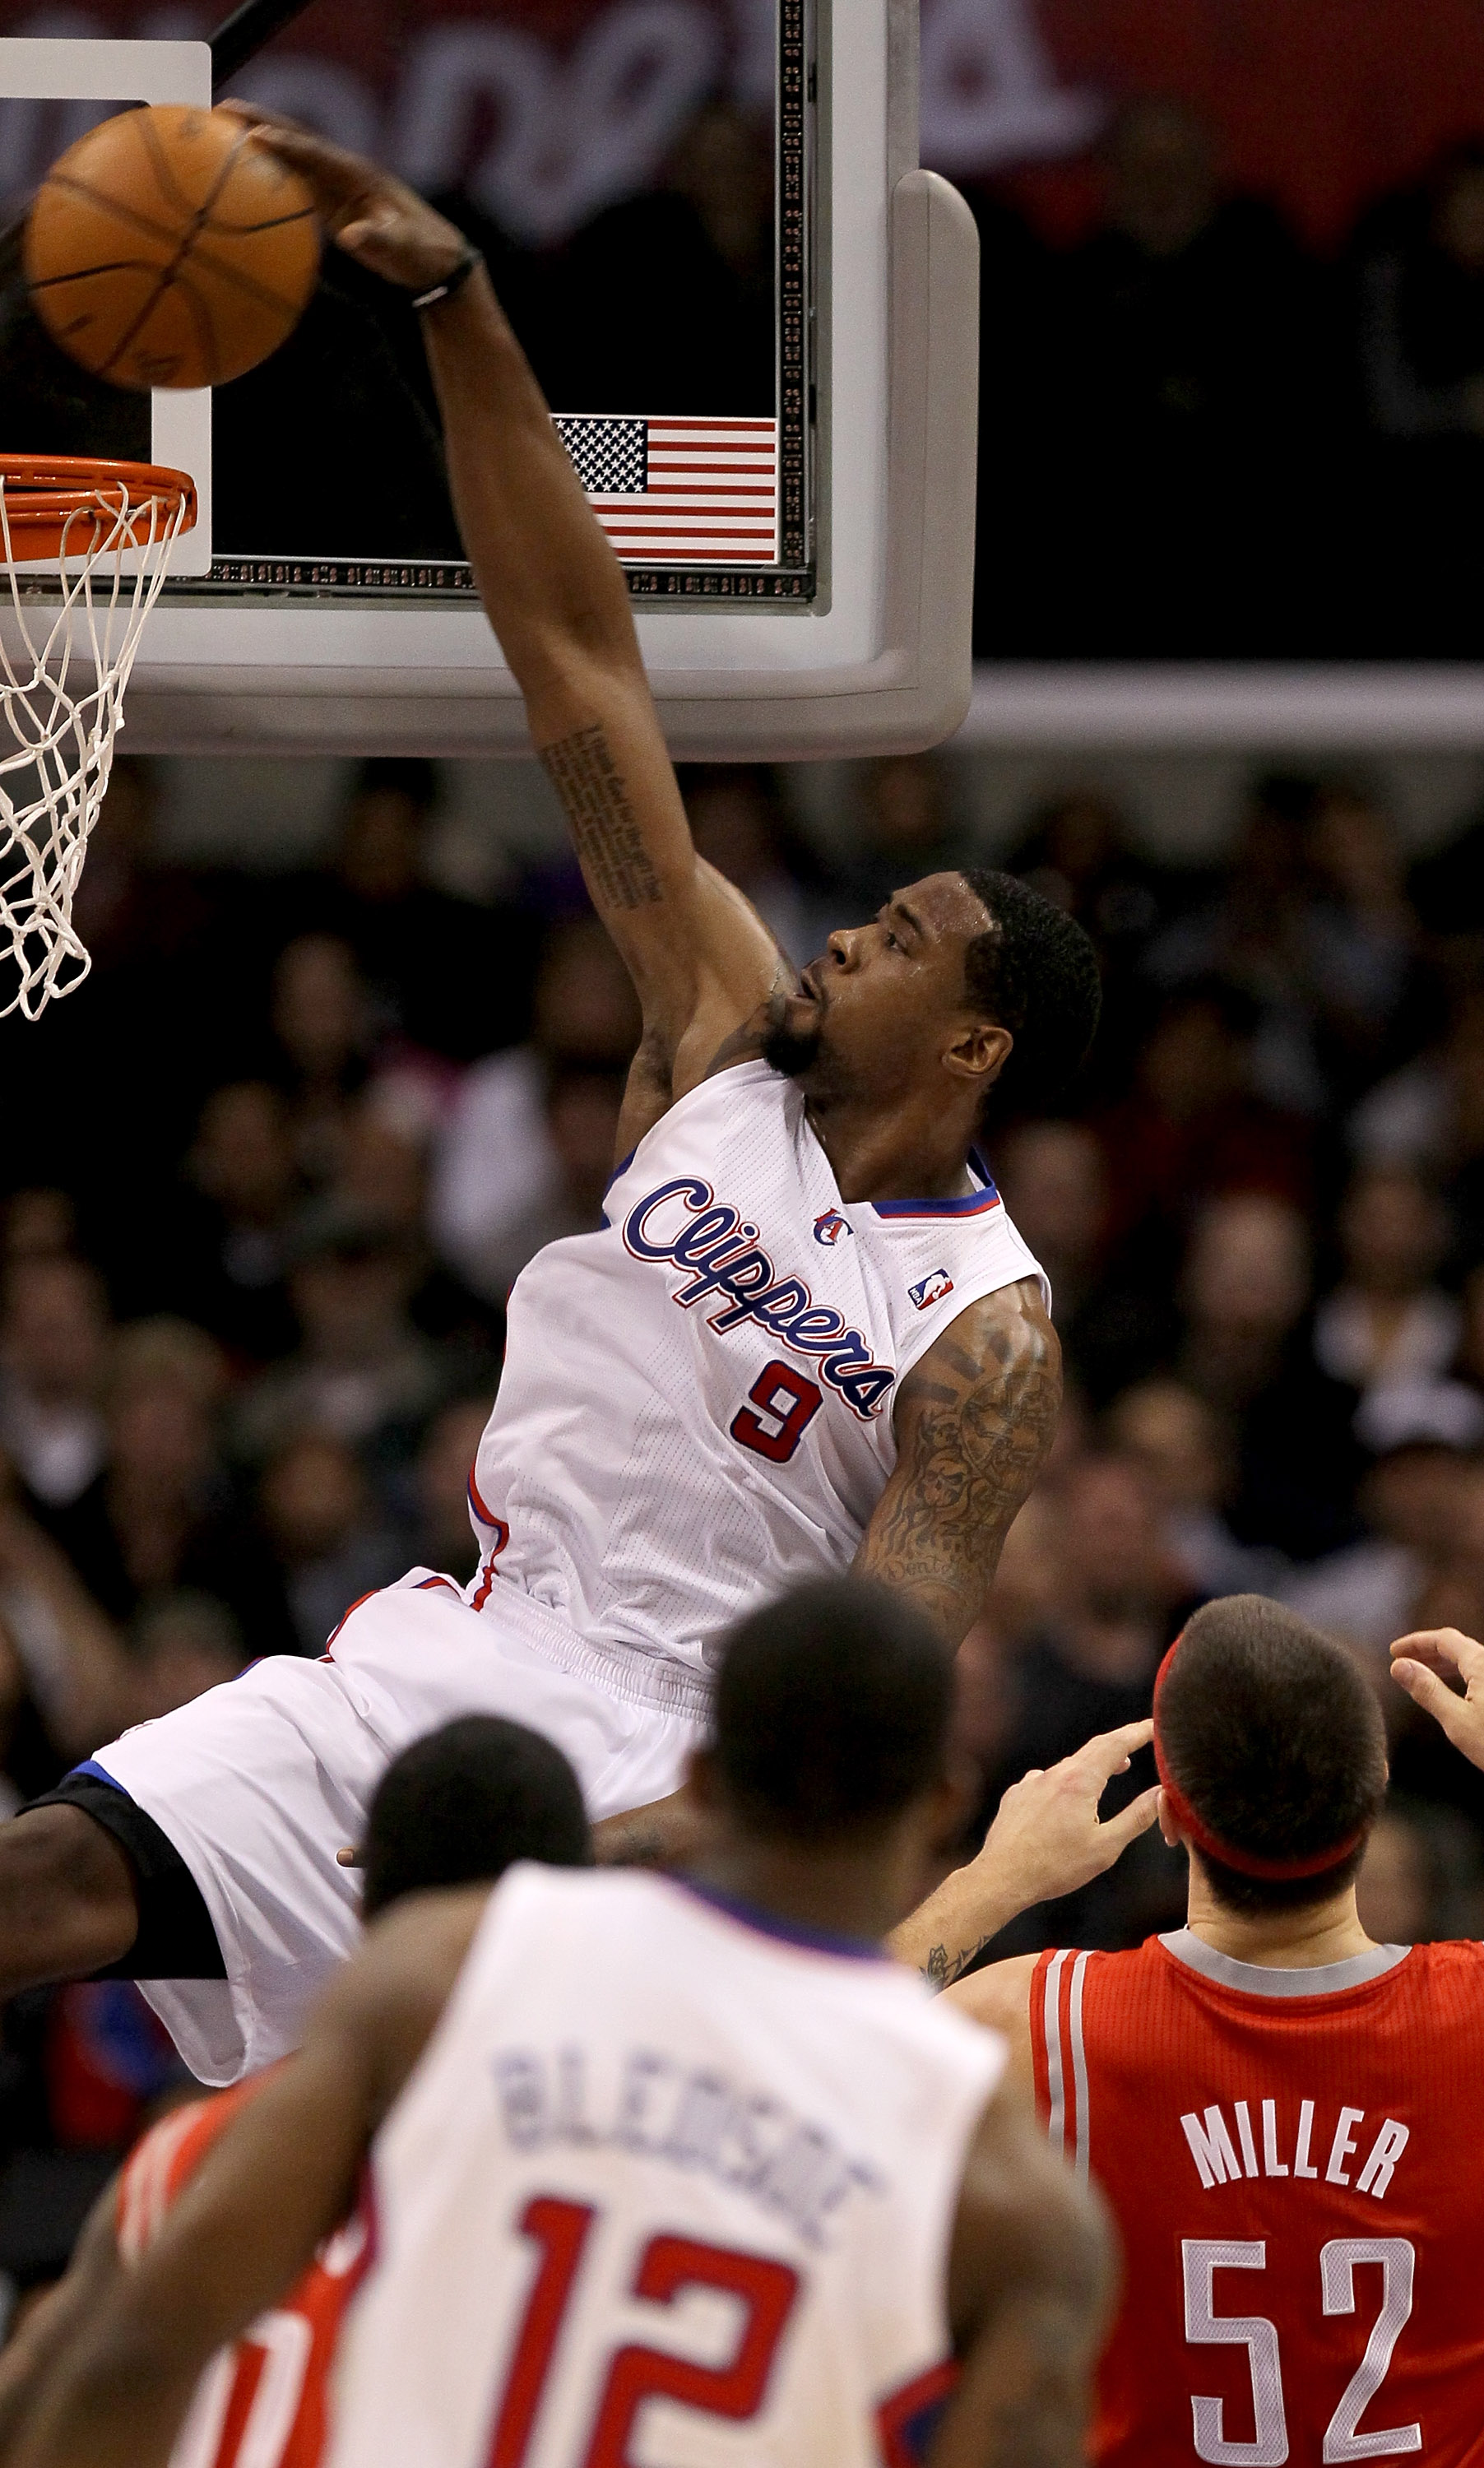 LOS ANGELES, CA - DECEMBER 22:   DeAndre Jordan #9 of the Los Angeles Clippers dunks against the Houston Rockets at Staples Center on December 22, 2010 in Los Angeles, California.  The Rockets won 97-92. NOTE TO USER: User expressly acknowledges and agree